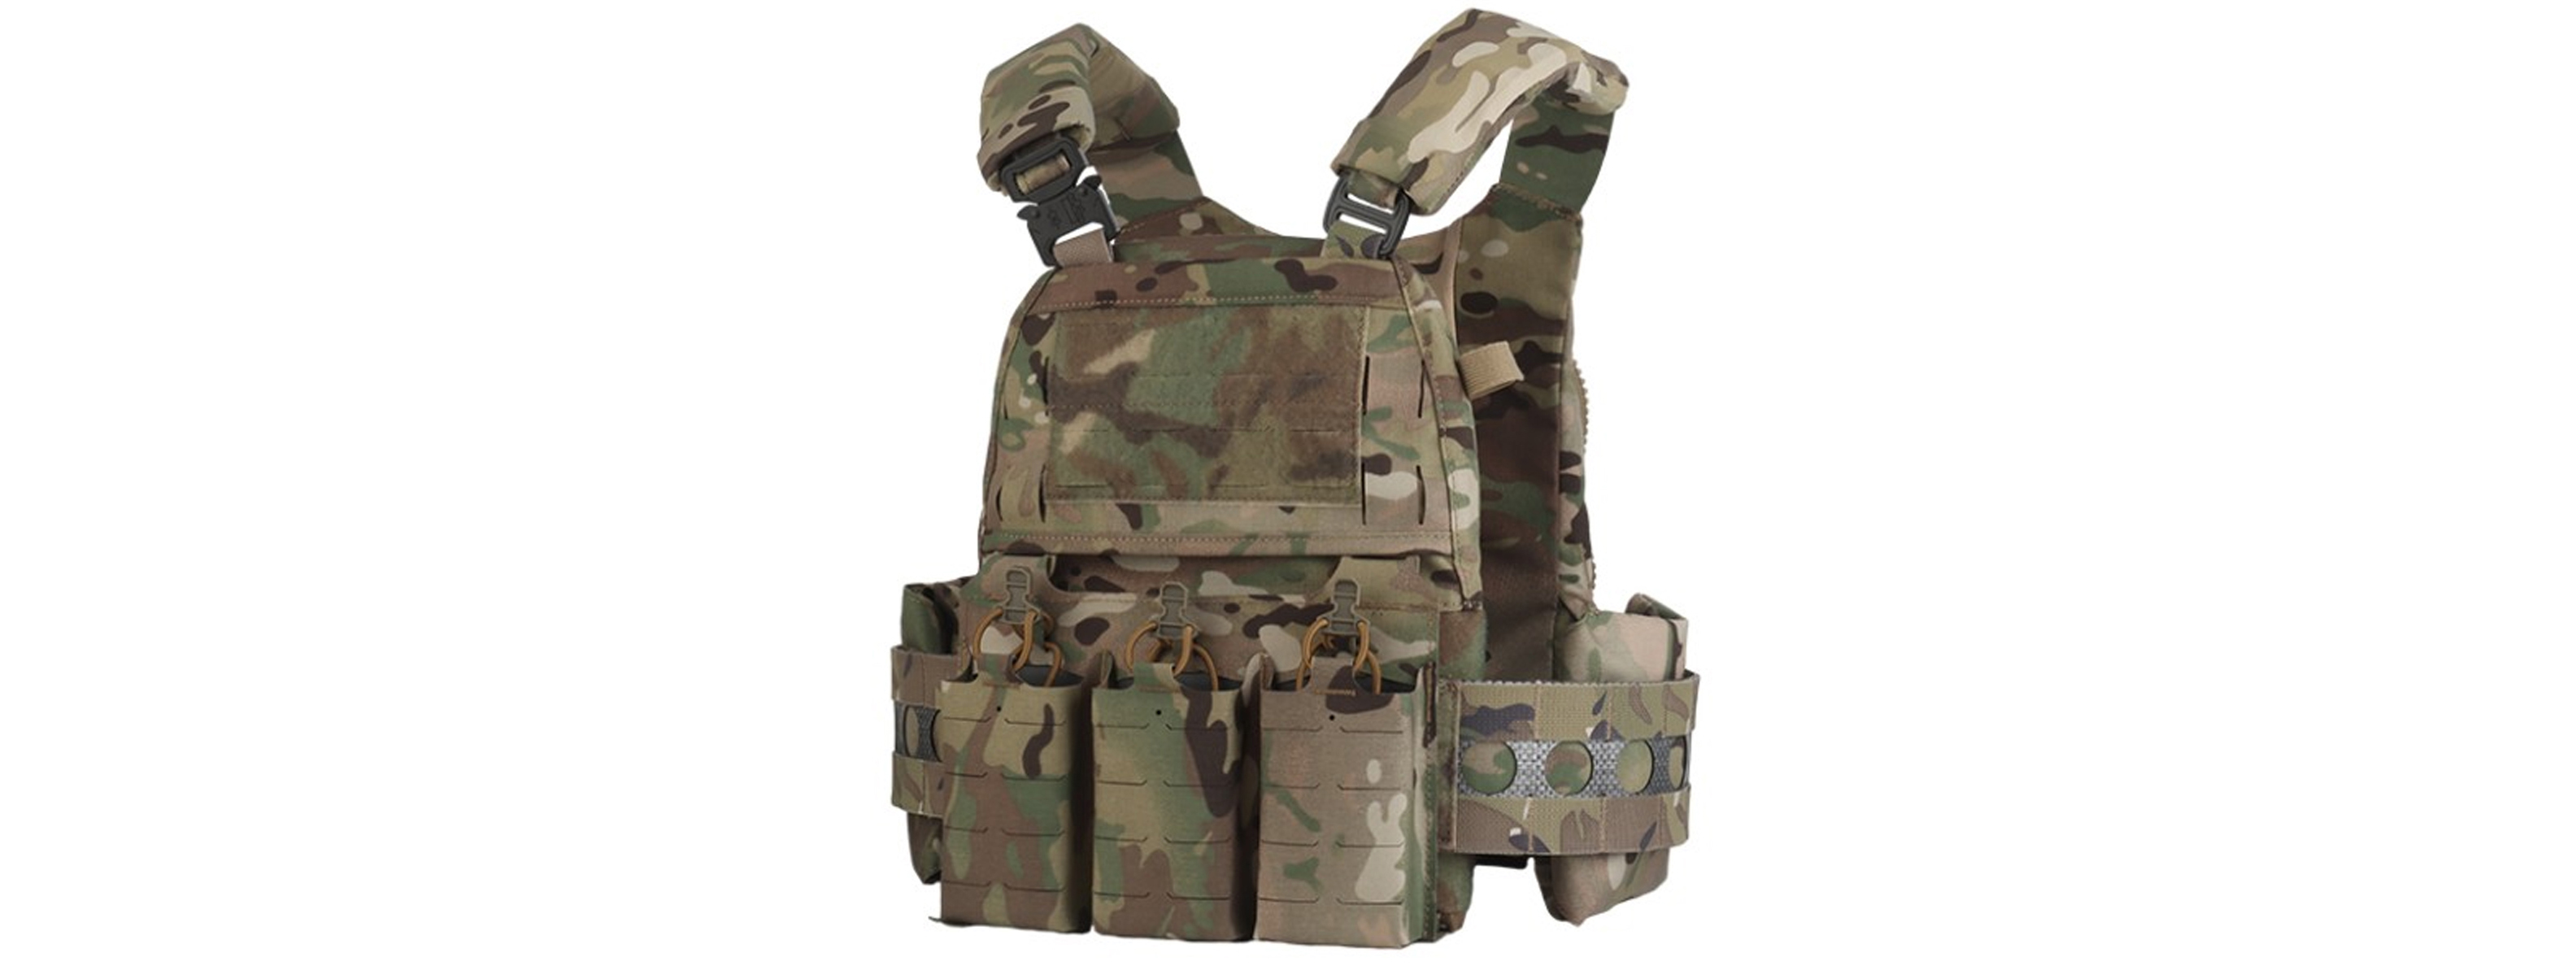 Plate Carrier Tactical Vest w/ Mag Pouches - (Camo)